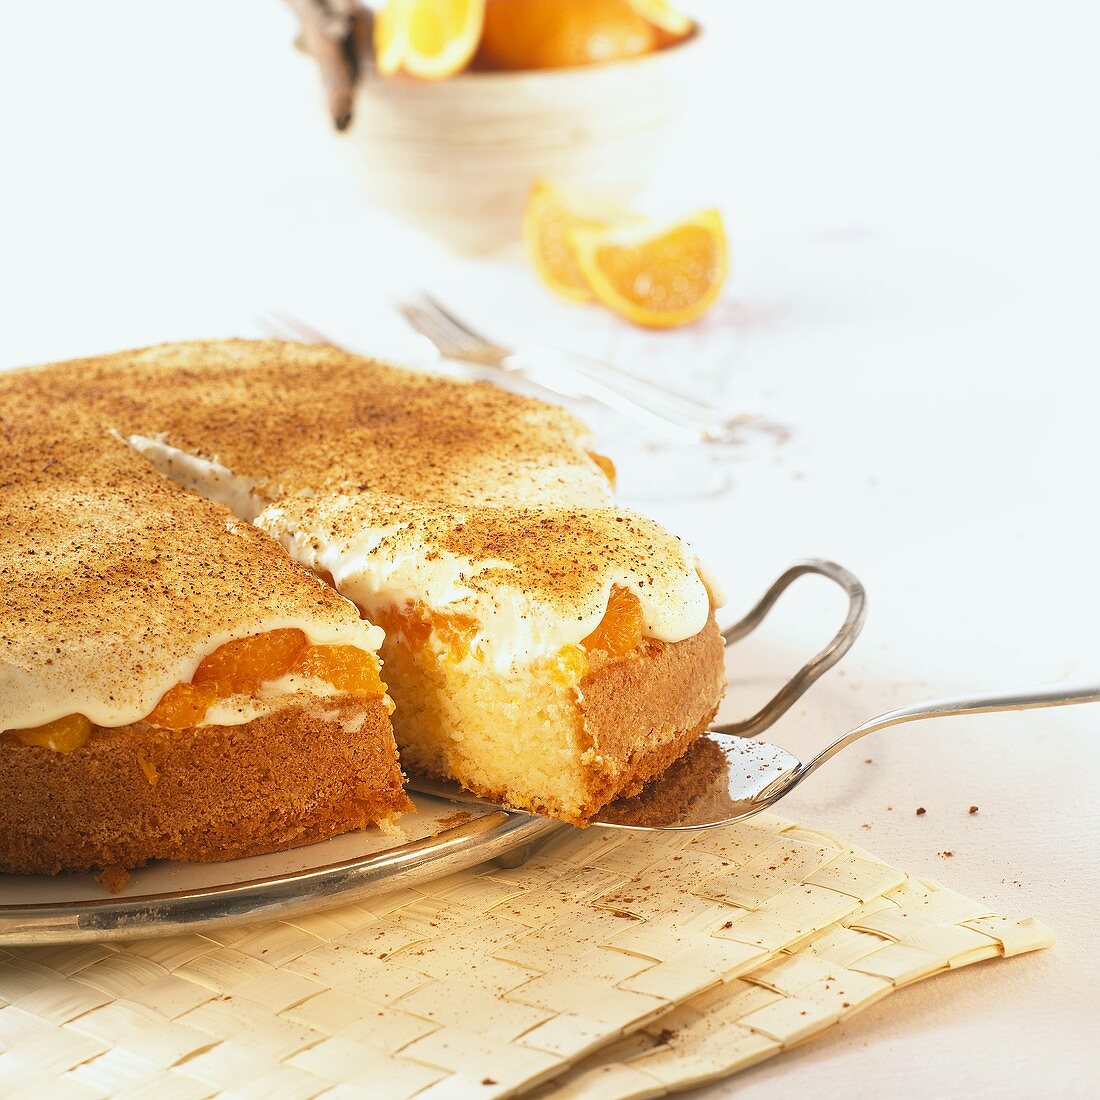 Mandarin orange cake with cinnamon, a piece partly removed